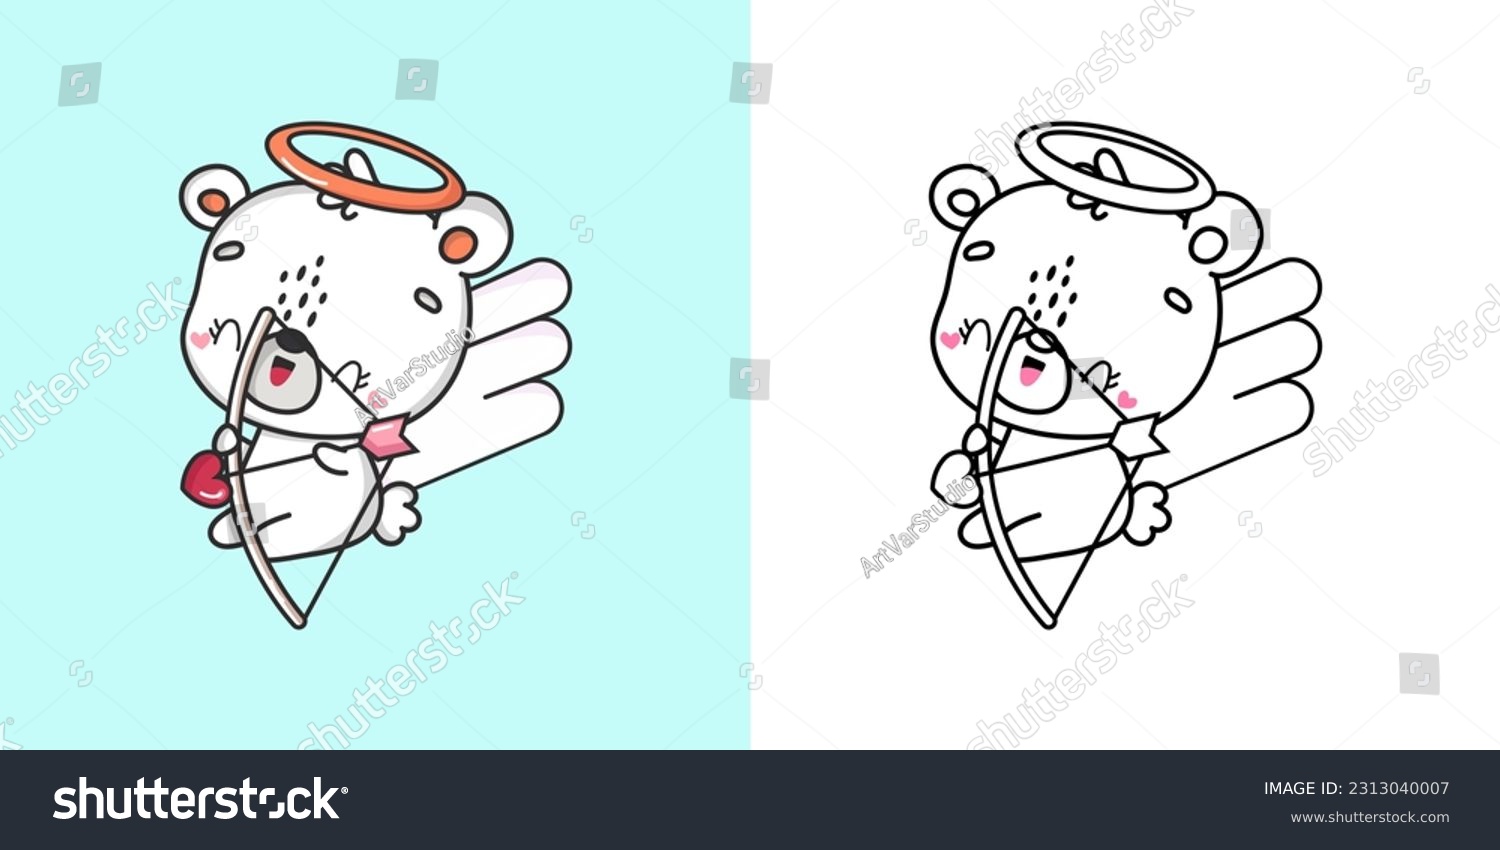 Cute Polar Bear Clipart Illustration and Black and White. Funny Bear Art. Vector Illustration of a Kawaii Animal for Coloring Pages, Stickers, Baby Shower, Prints for Clothes.
 #2313040007